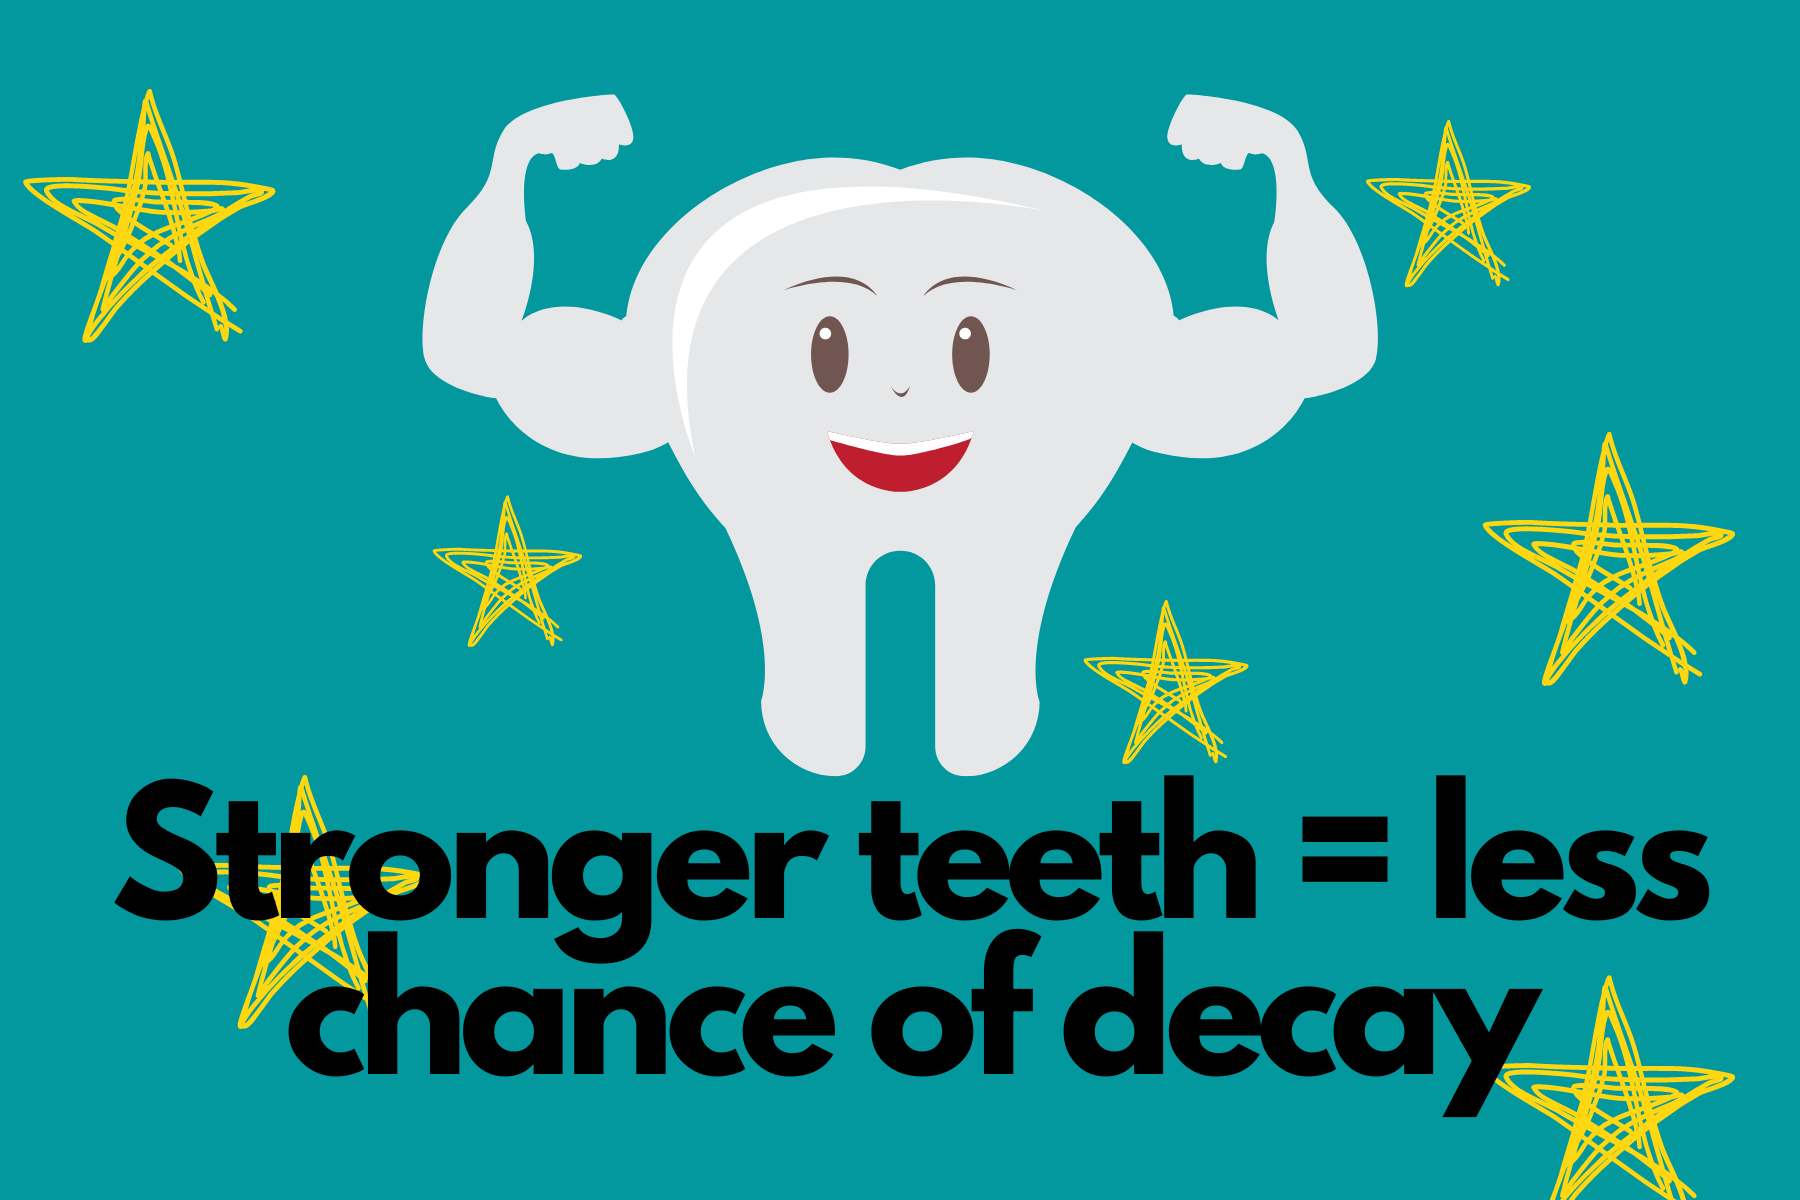 Infographic for fluoride treatment about strengthening teeth